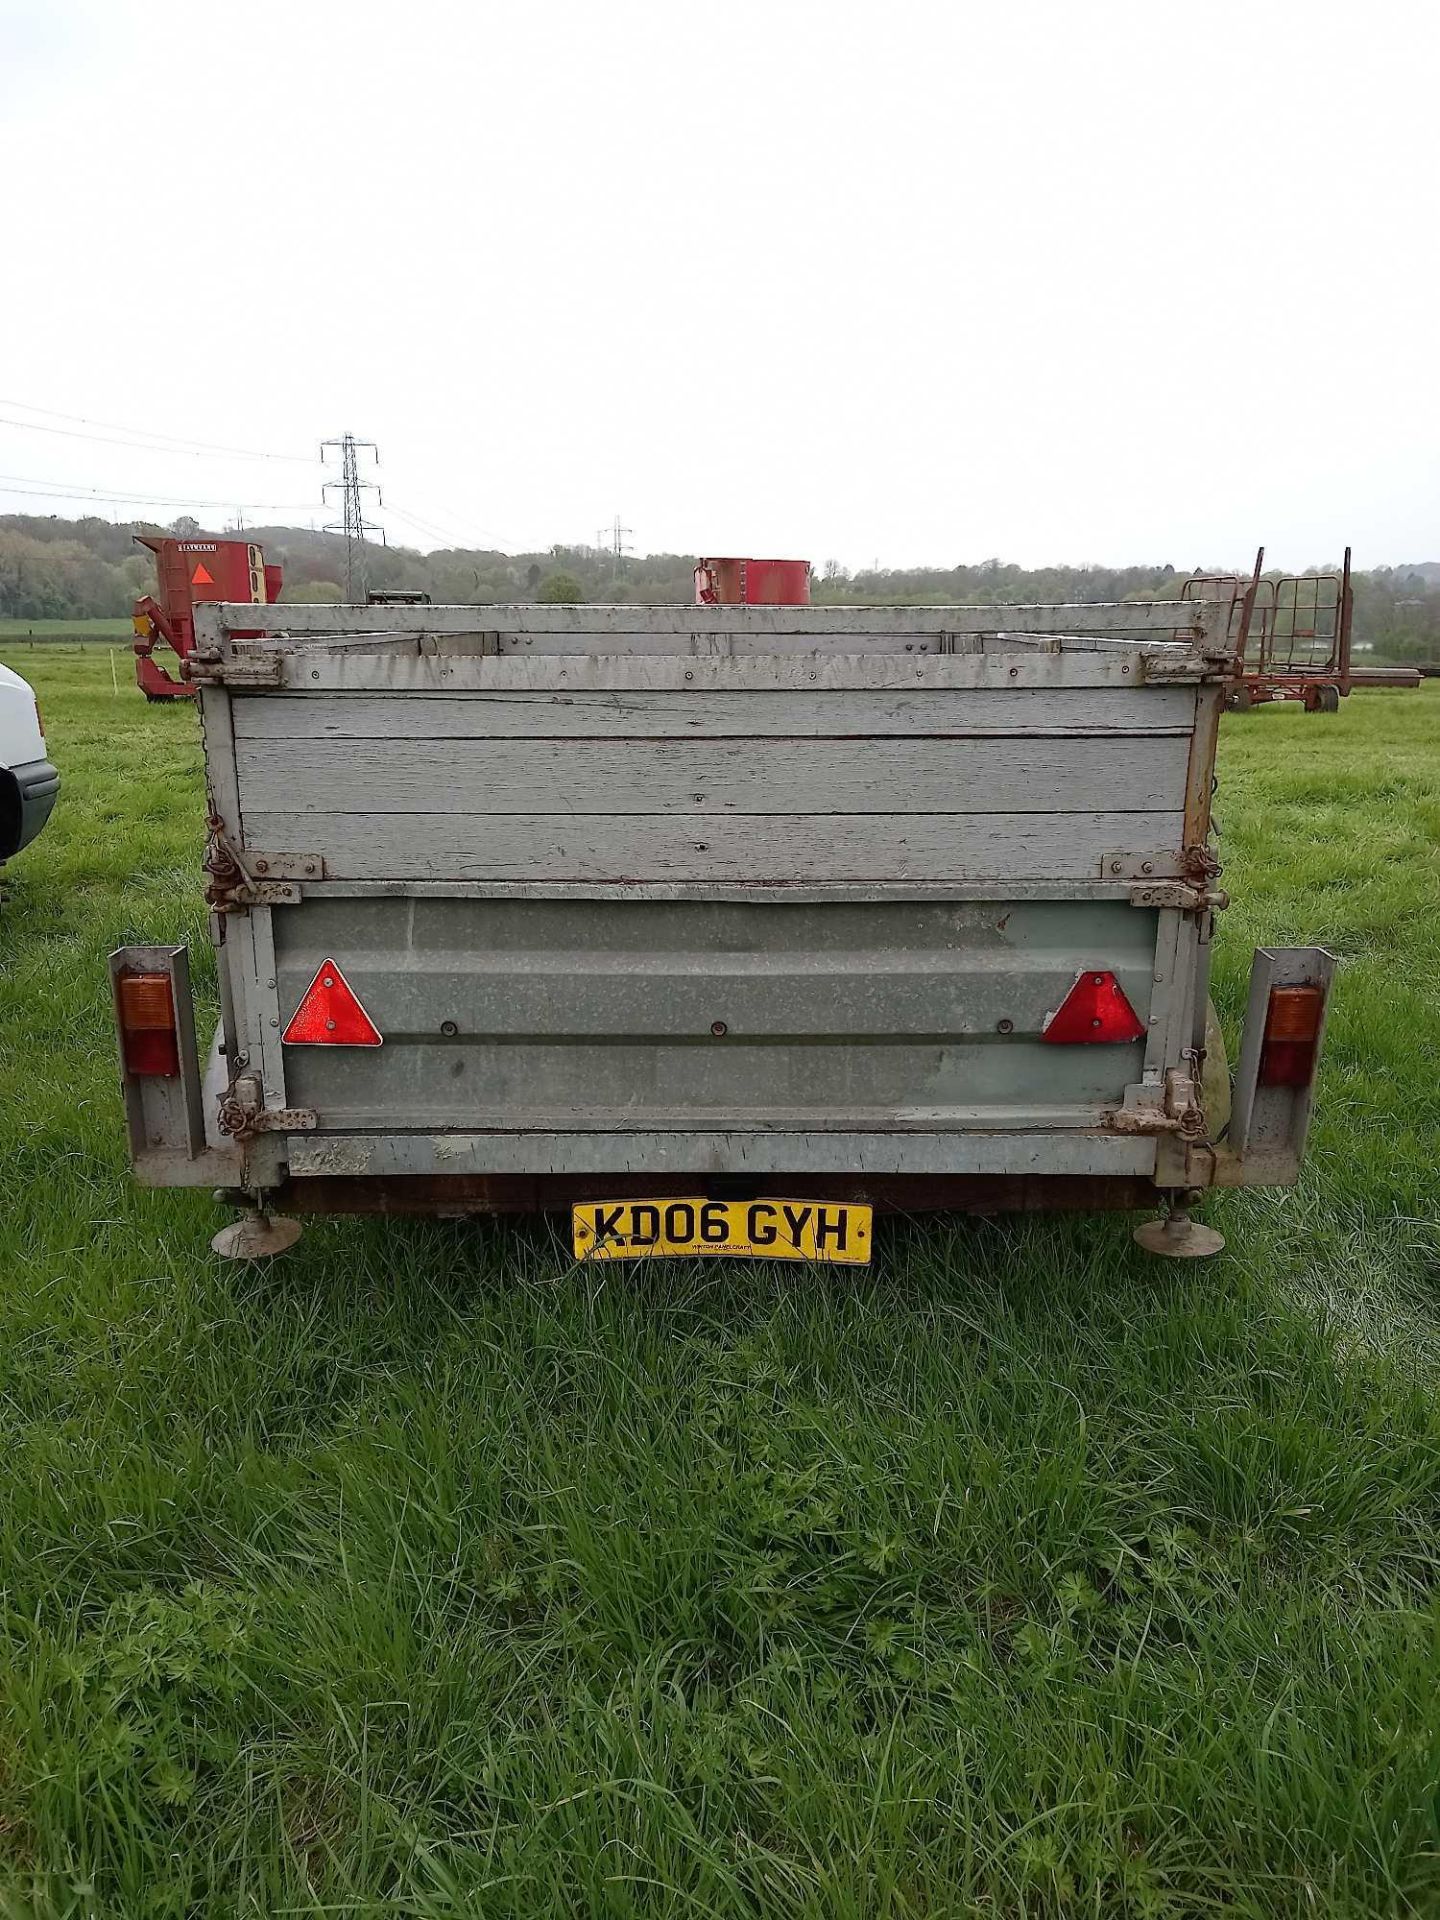 Twin axle car trailer, battery operate hydraulic tipper, 8ft 6 inch, greedy board sides - Image 2 of 3